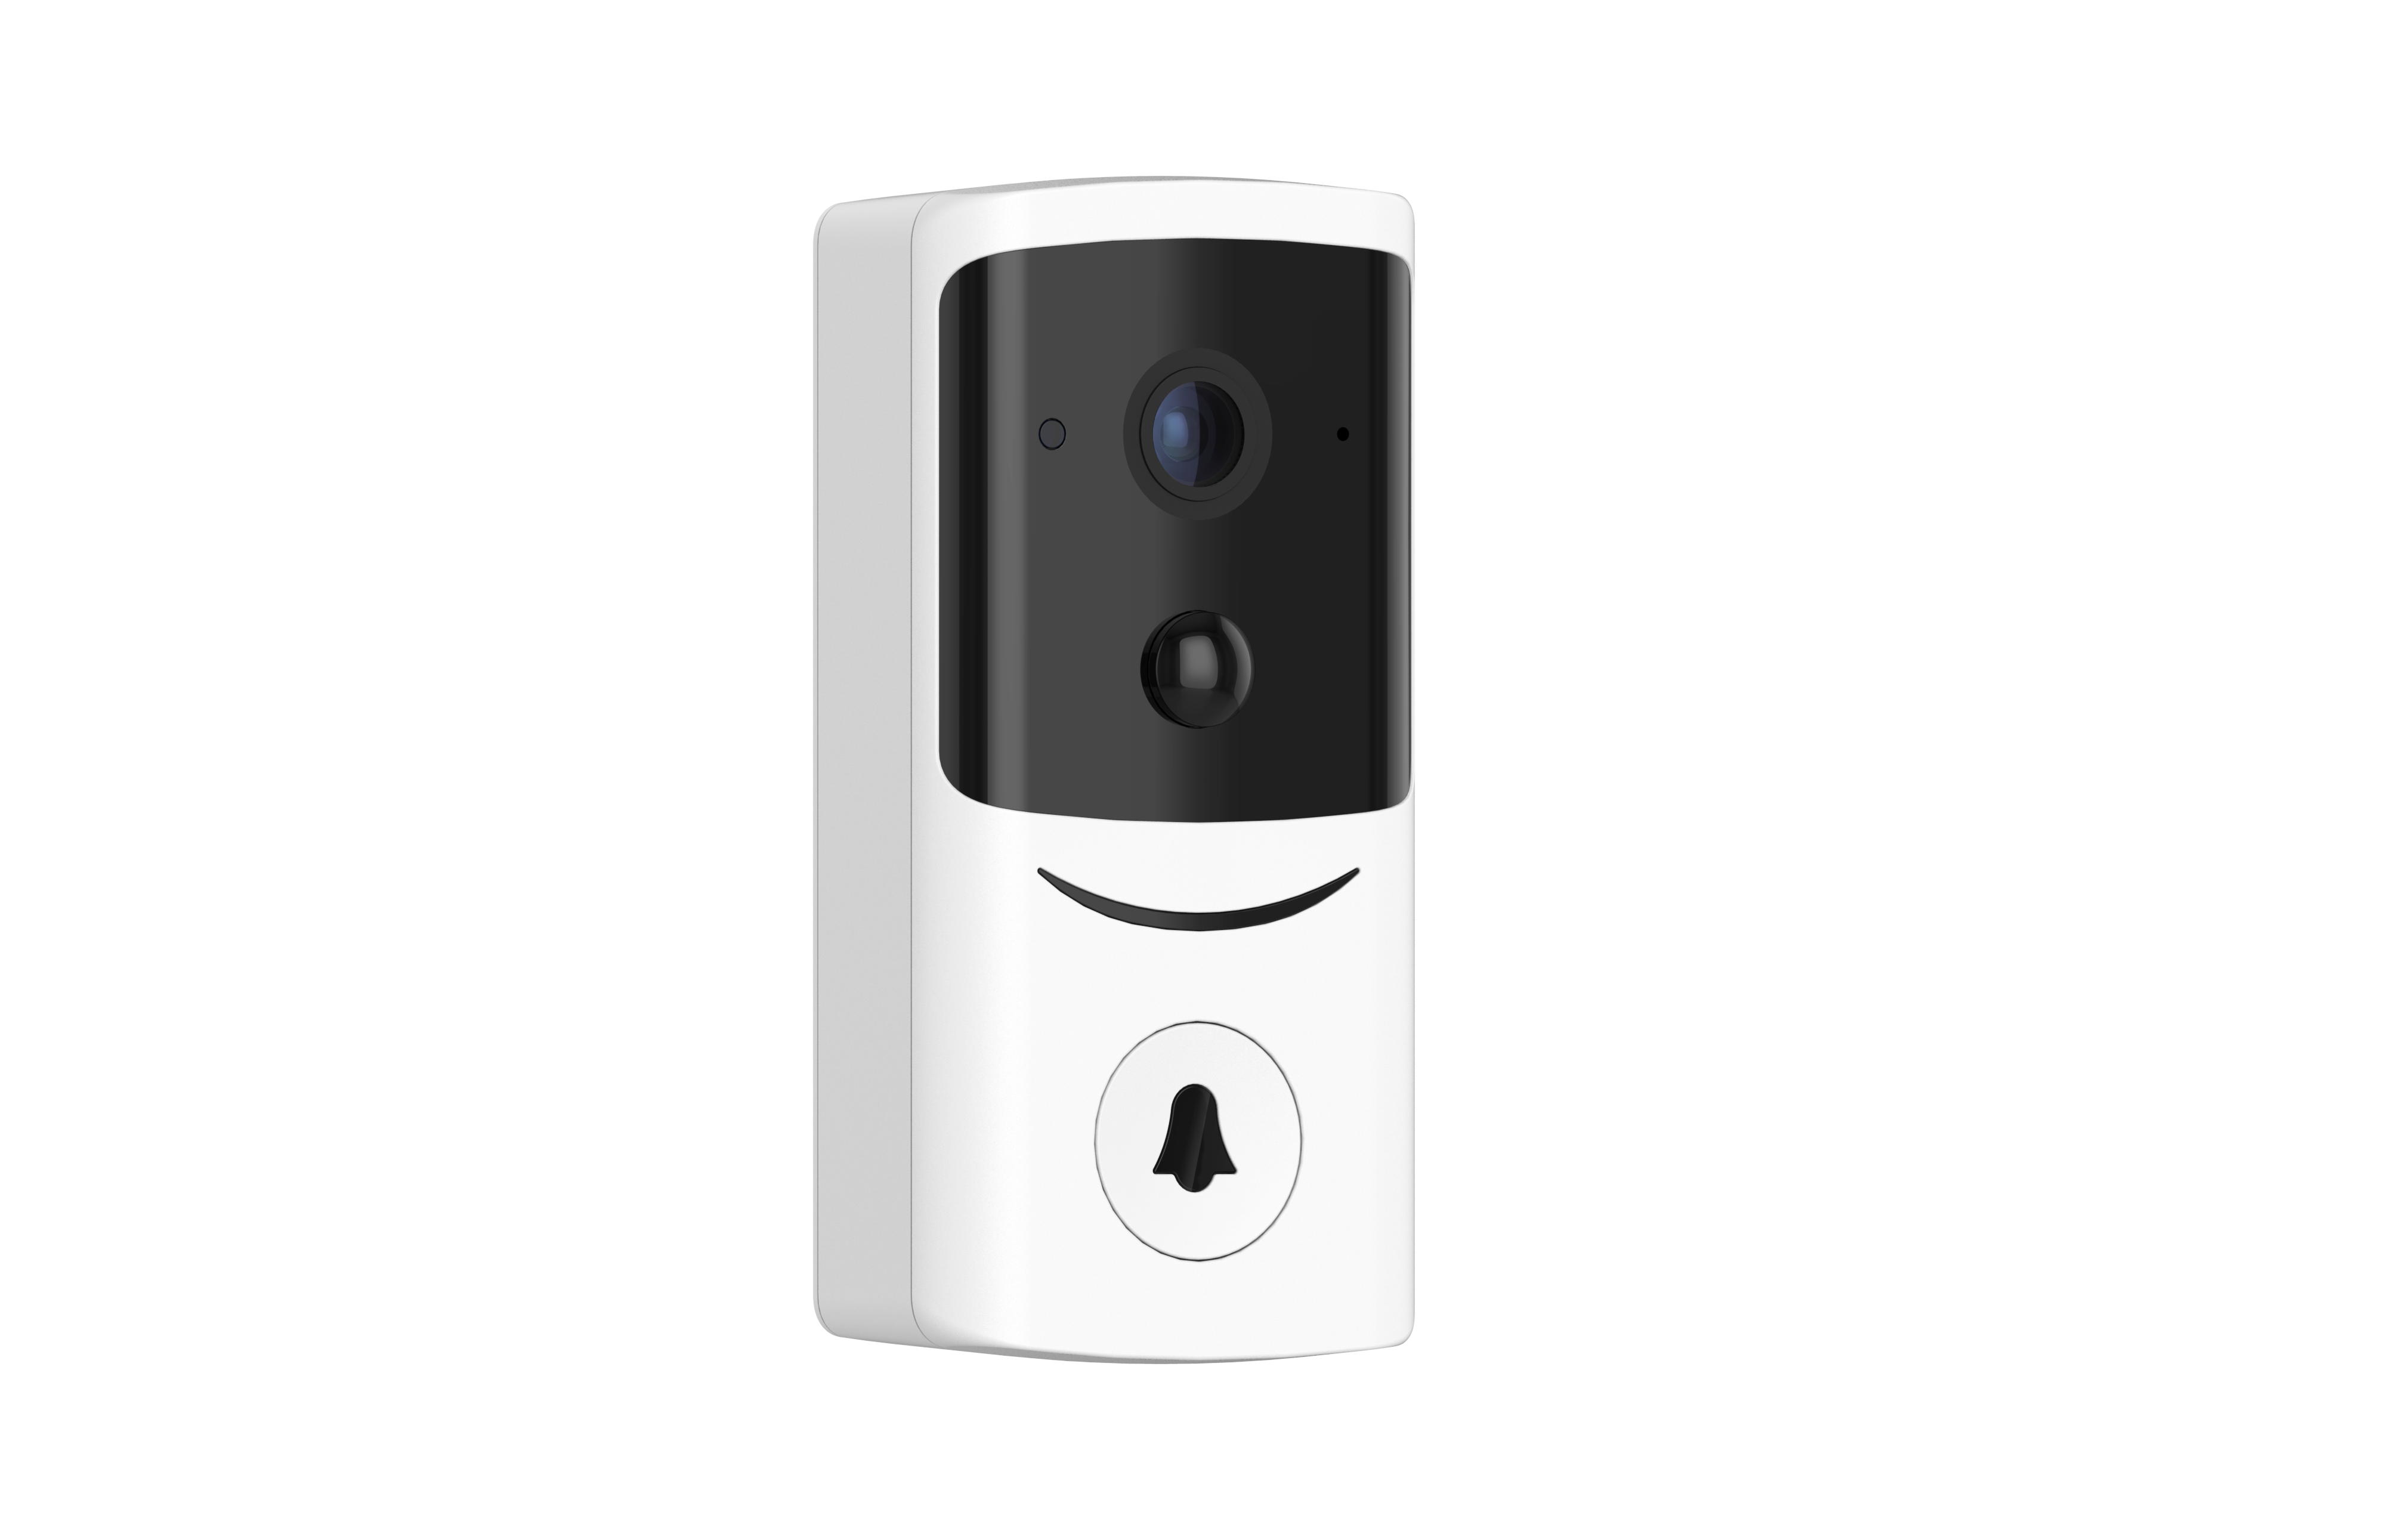 How does this doorbell camera work?